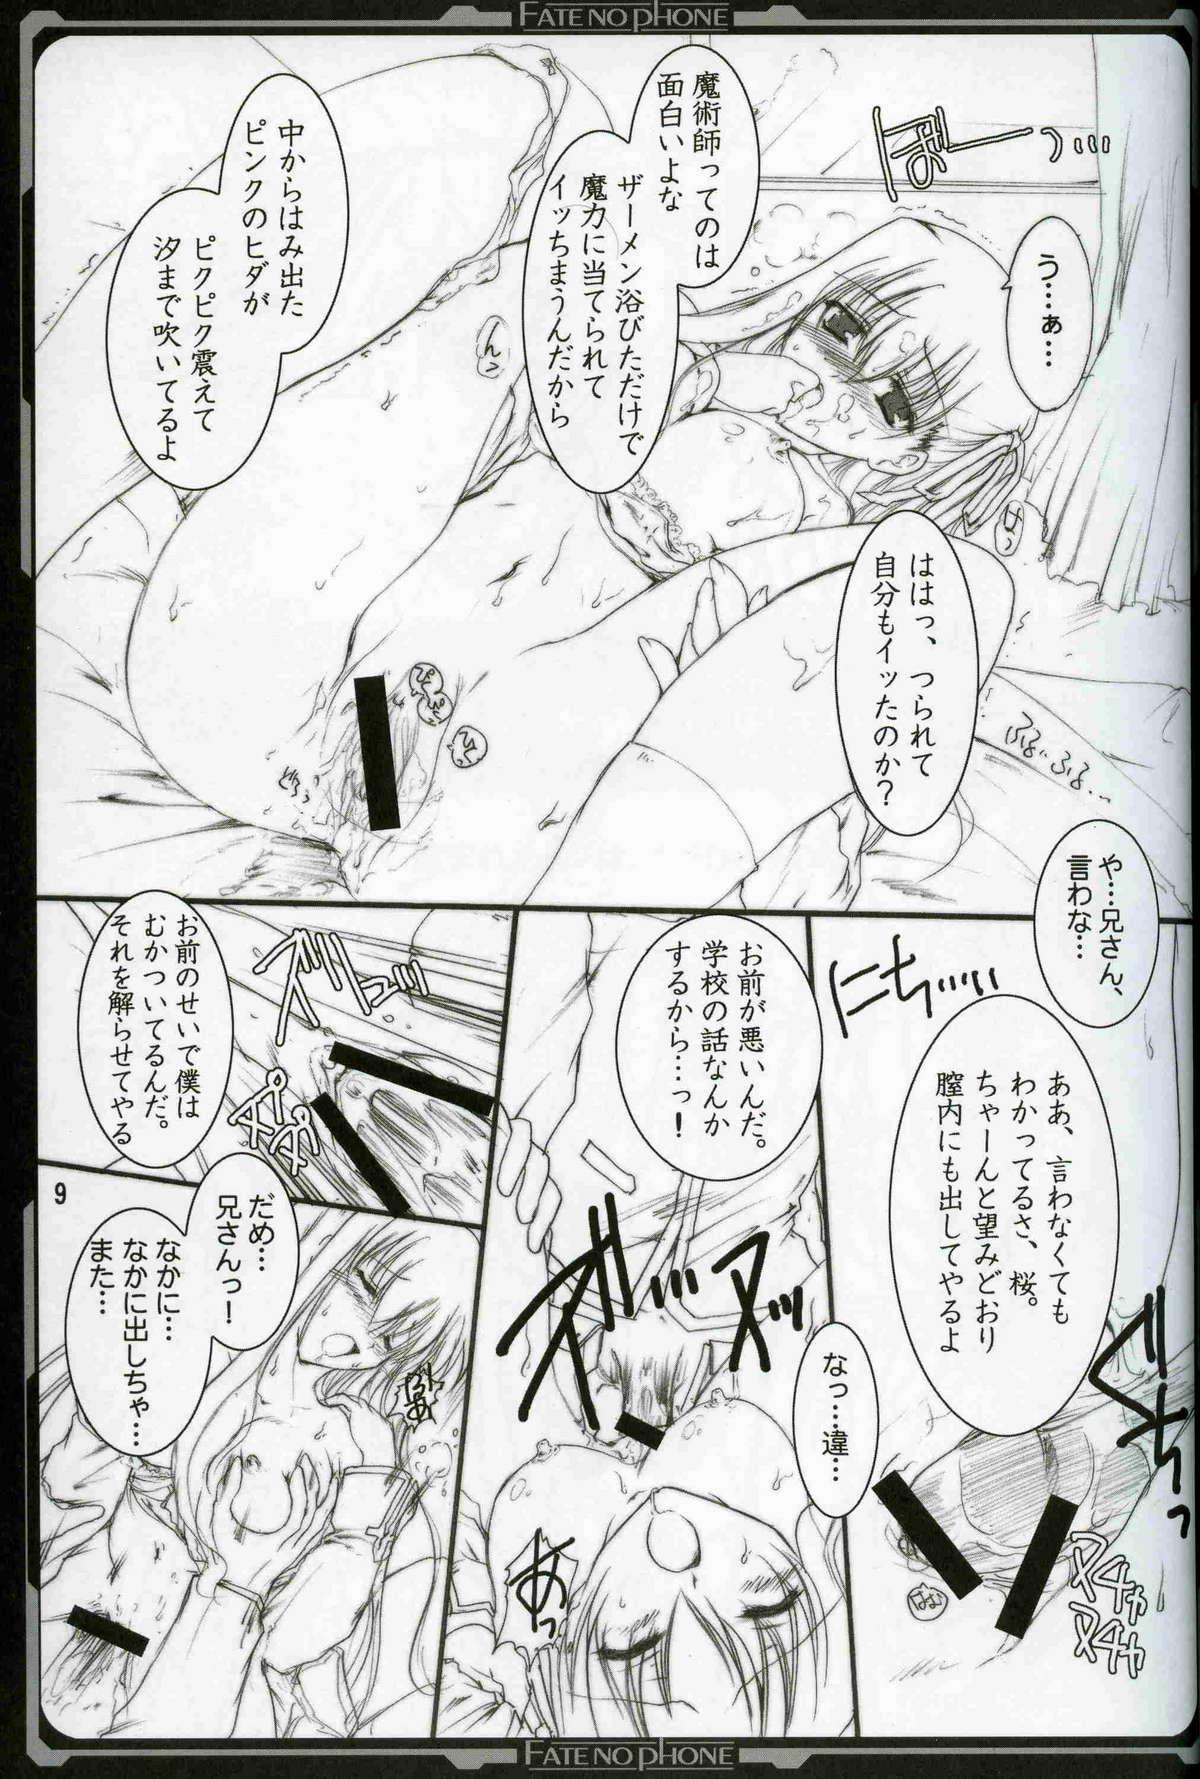 Sofa Fate/no phone - Fate stay night Ball Sucking - Page 8